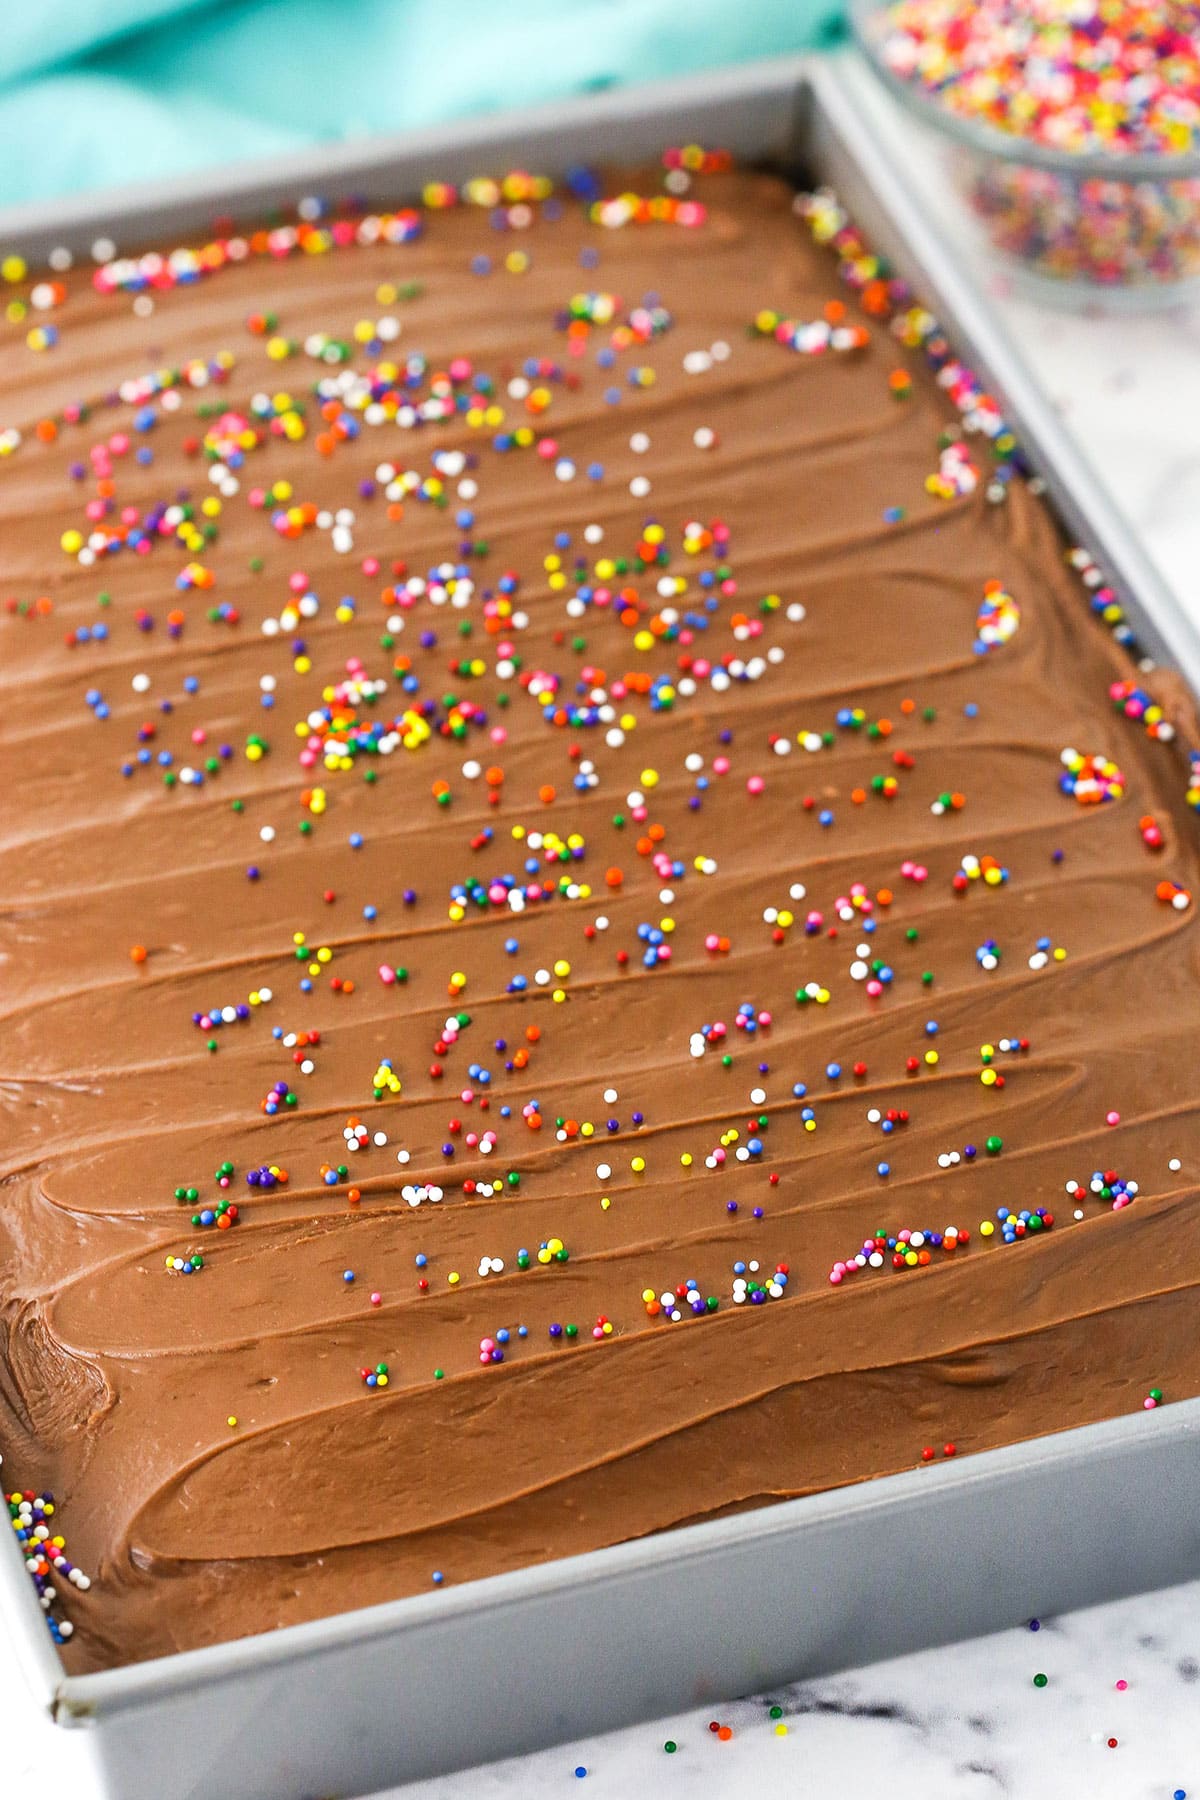 Overhead view of a full Wacky Cake with chocolate frosting and colorful sprinkles in a silver cake pan